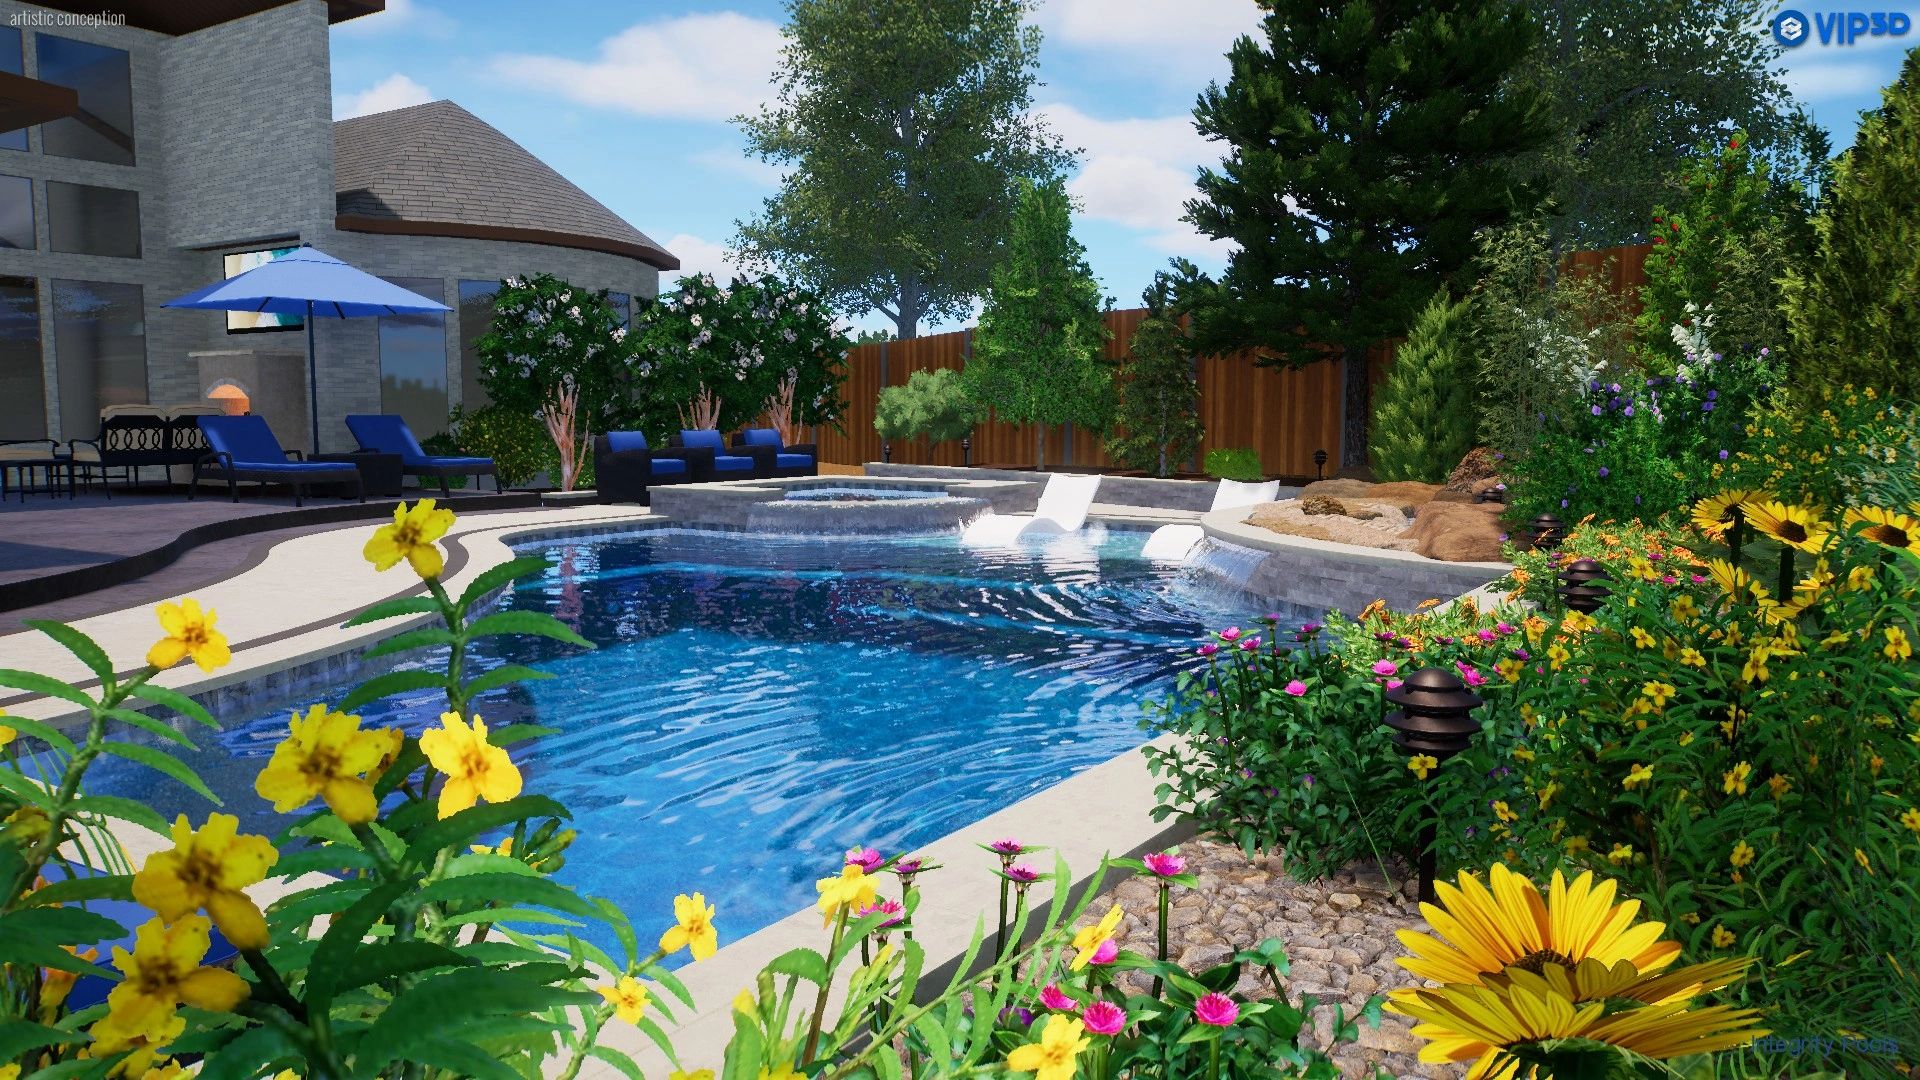 dallas richardson build a new pool 1 Dallas Pool Builders: Transforming Dreams into Reality with Integrity Pools